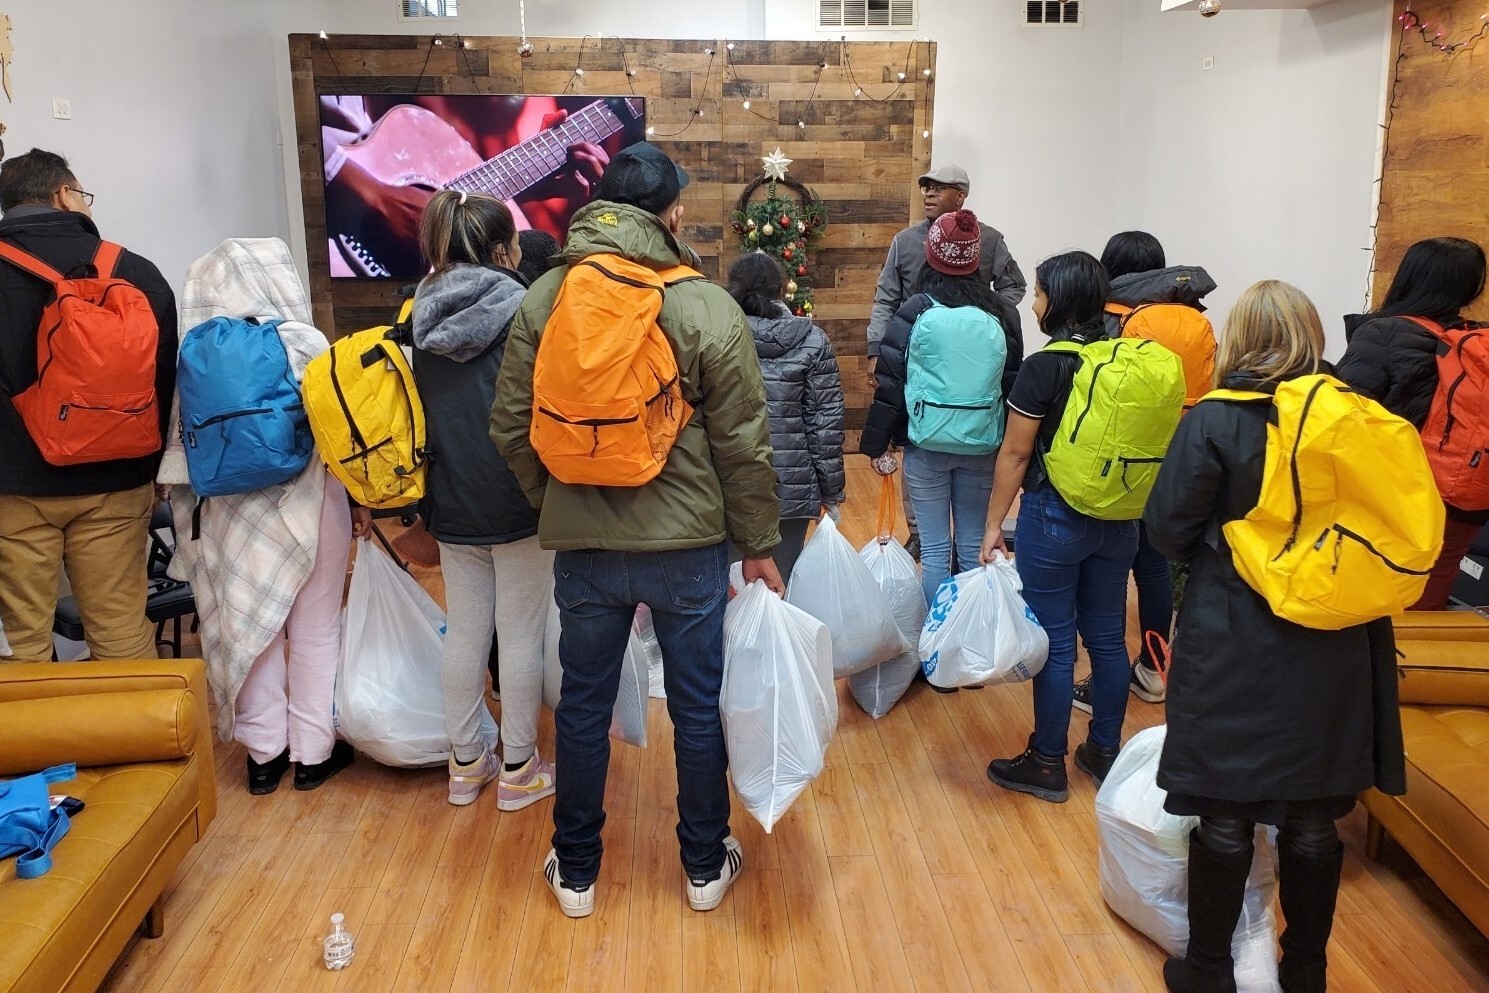 Several+people+stand+with+colorful+backpacks+and+garbage+bags%2C+with+their+backs+to+the+camera.